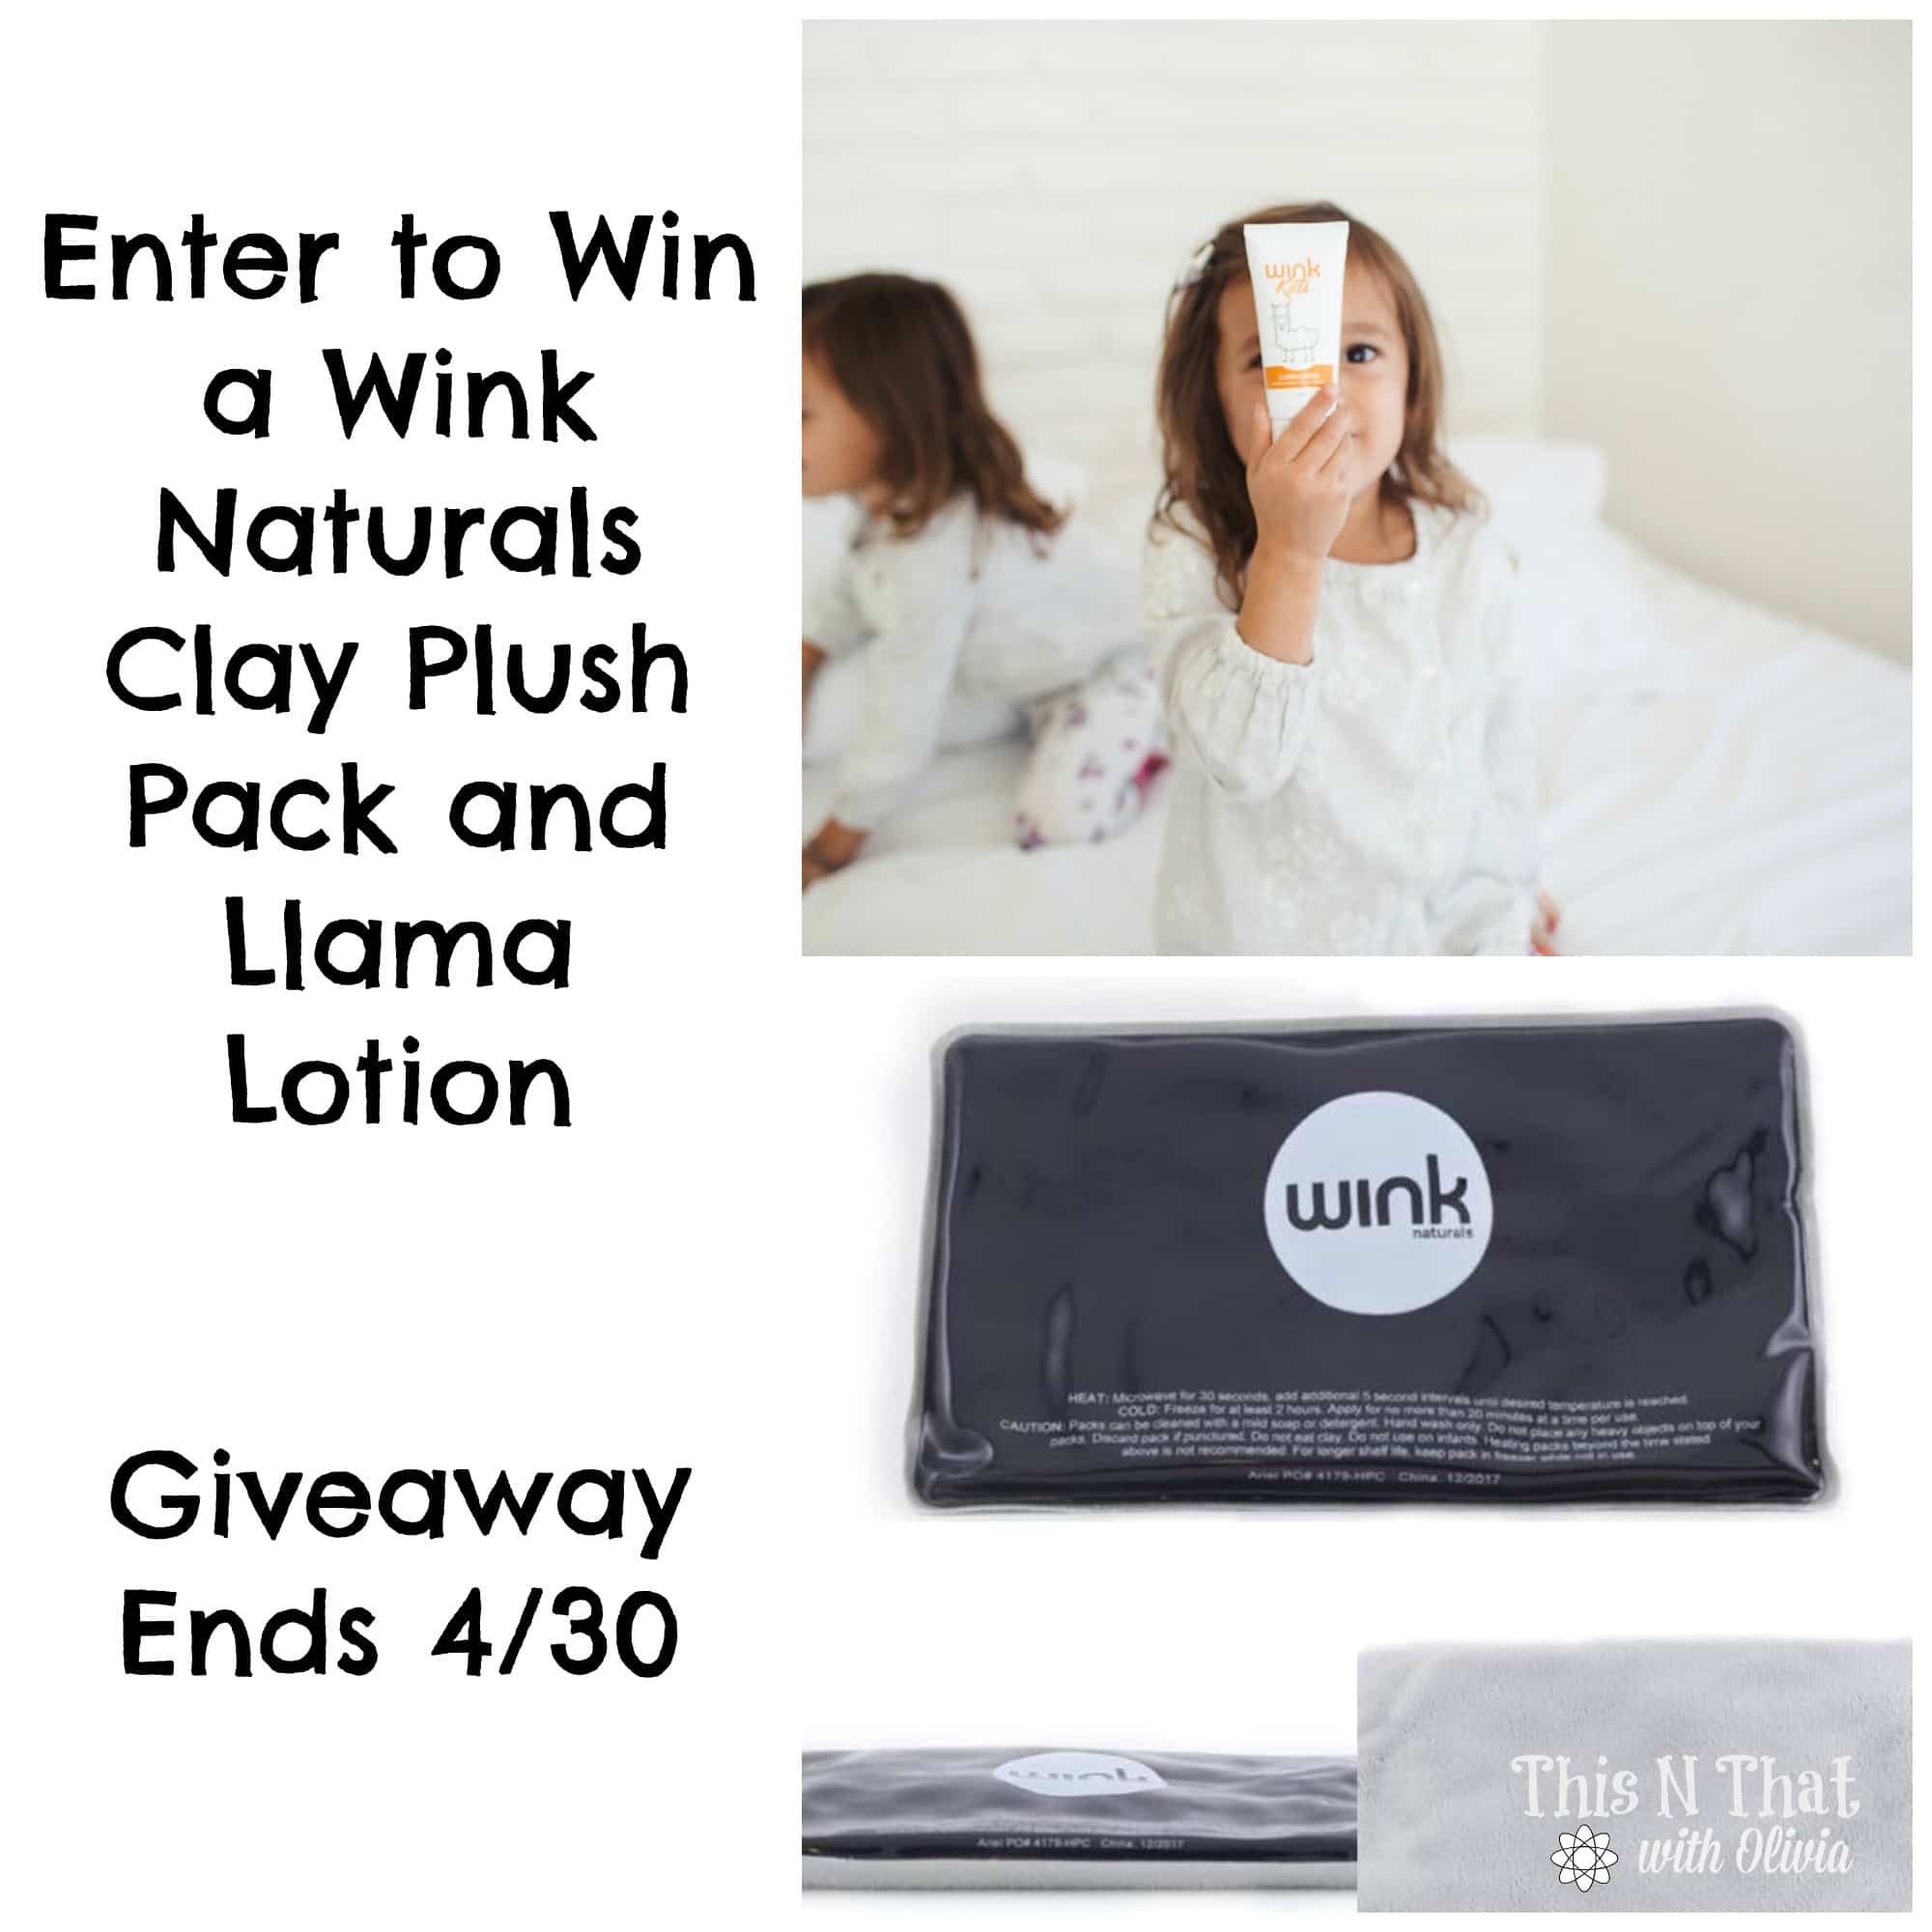 Full Bloom Giveaway Hop -- Enter to Win a Clay Plush Pack + Llama Lotion! Ends 4/30